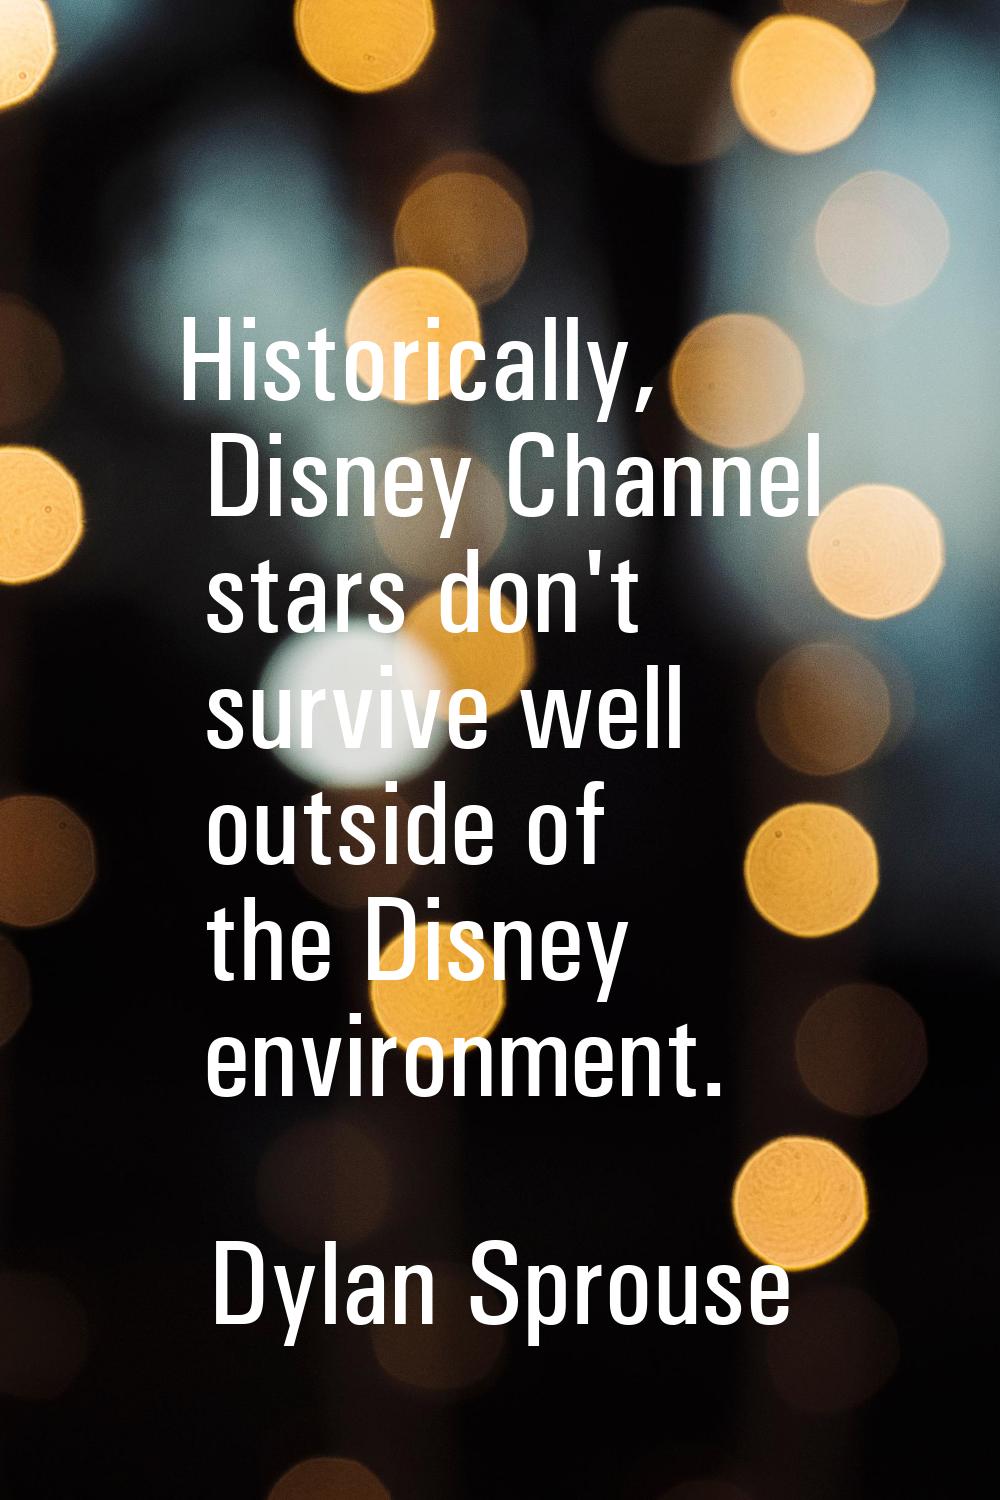 Historically, Disney Channel stars don't survive well outside of the Disney environment.